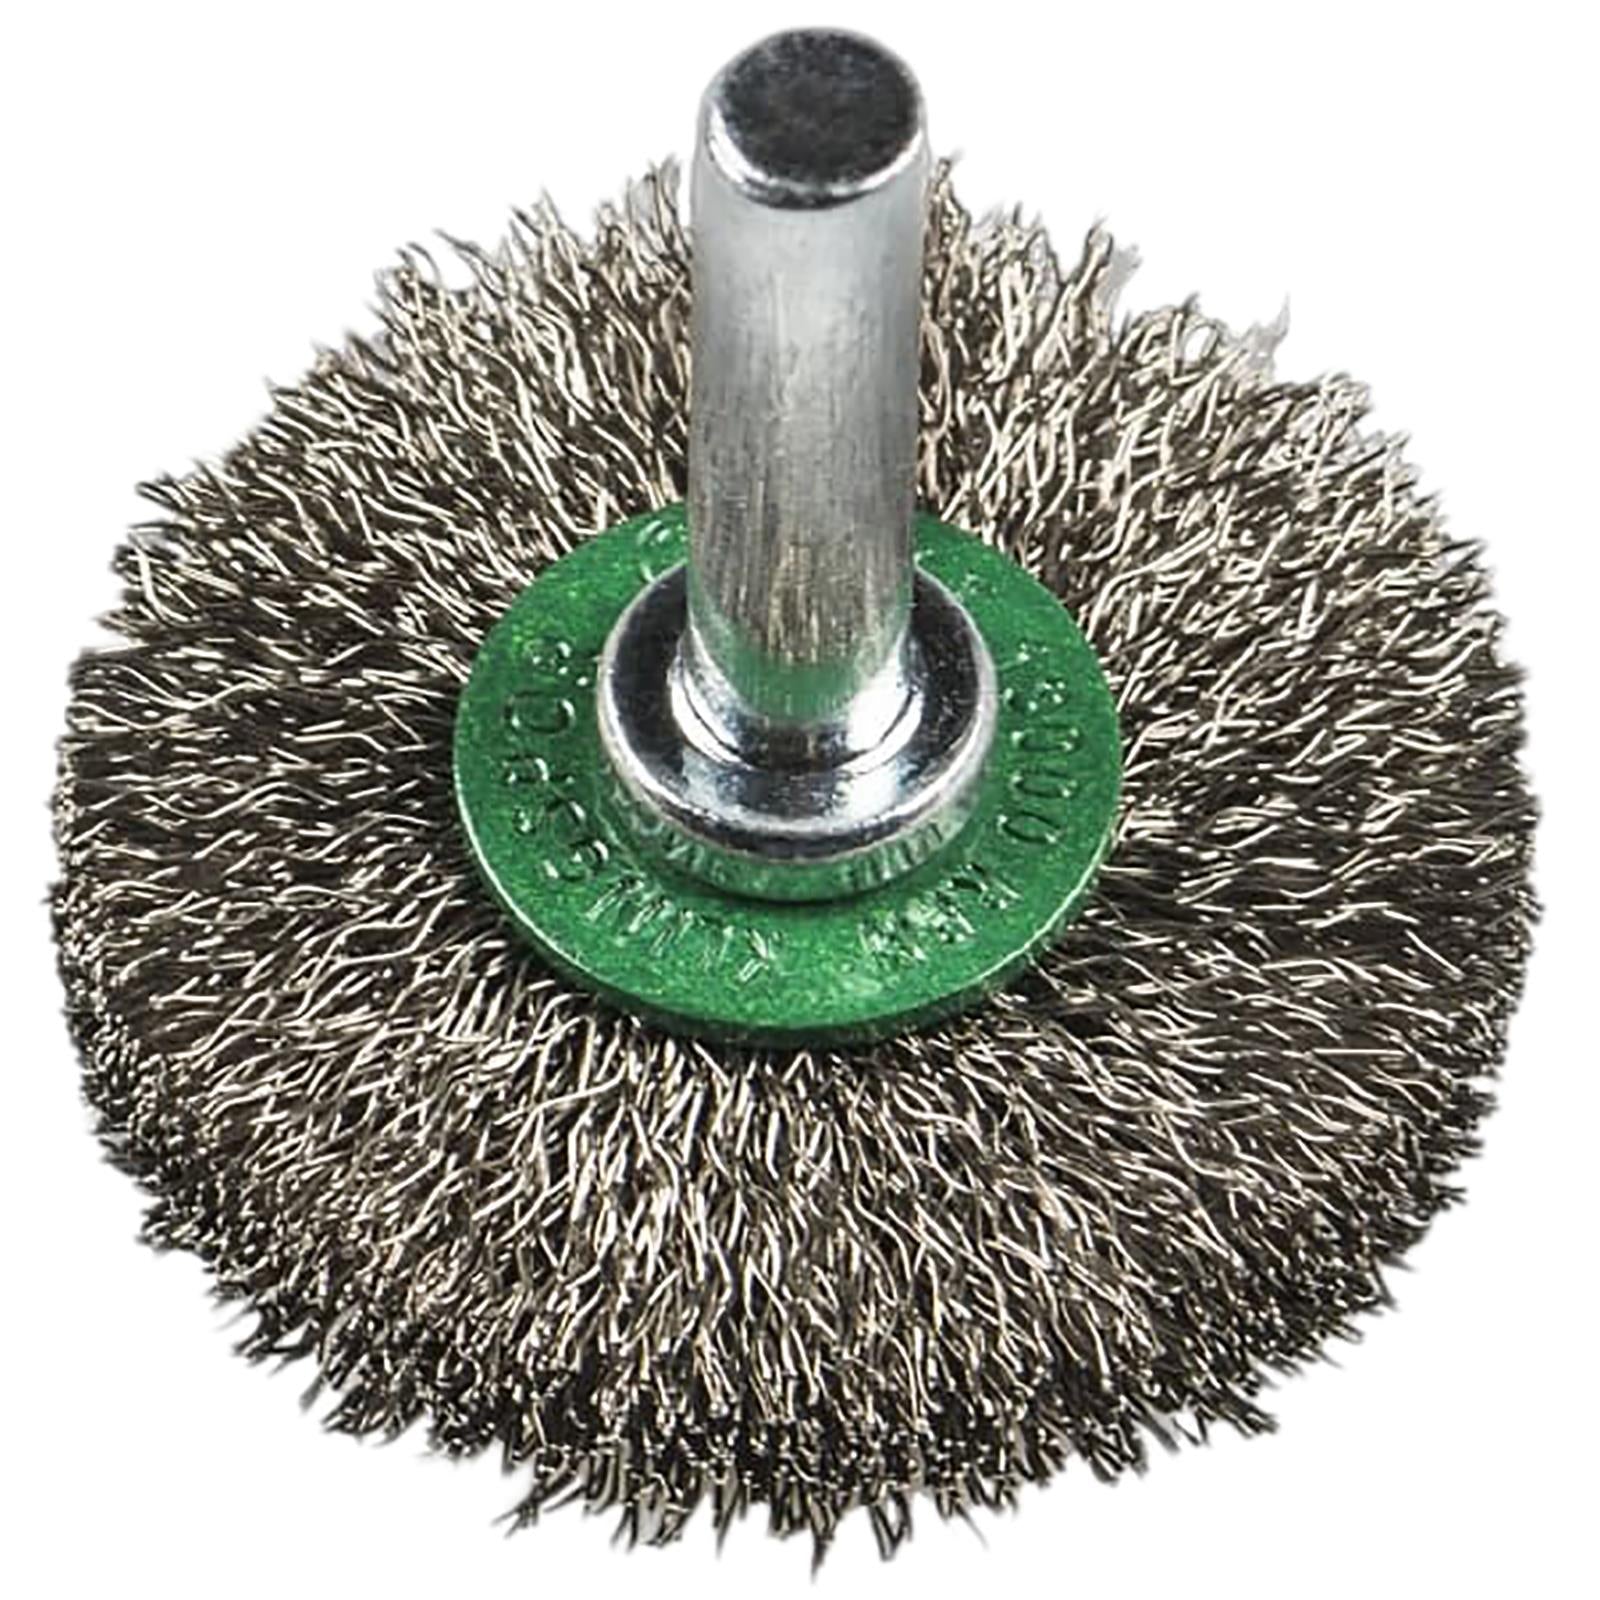 Klingspor Crimped Wire Wheel Brush 30mm 40mm 50mm 60mm 70mm 6mm Shank Stainless Steel BRS600W